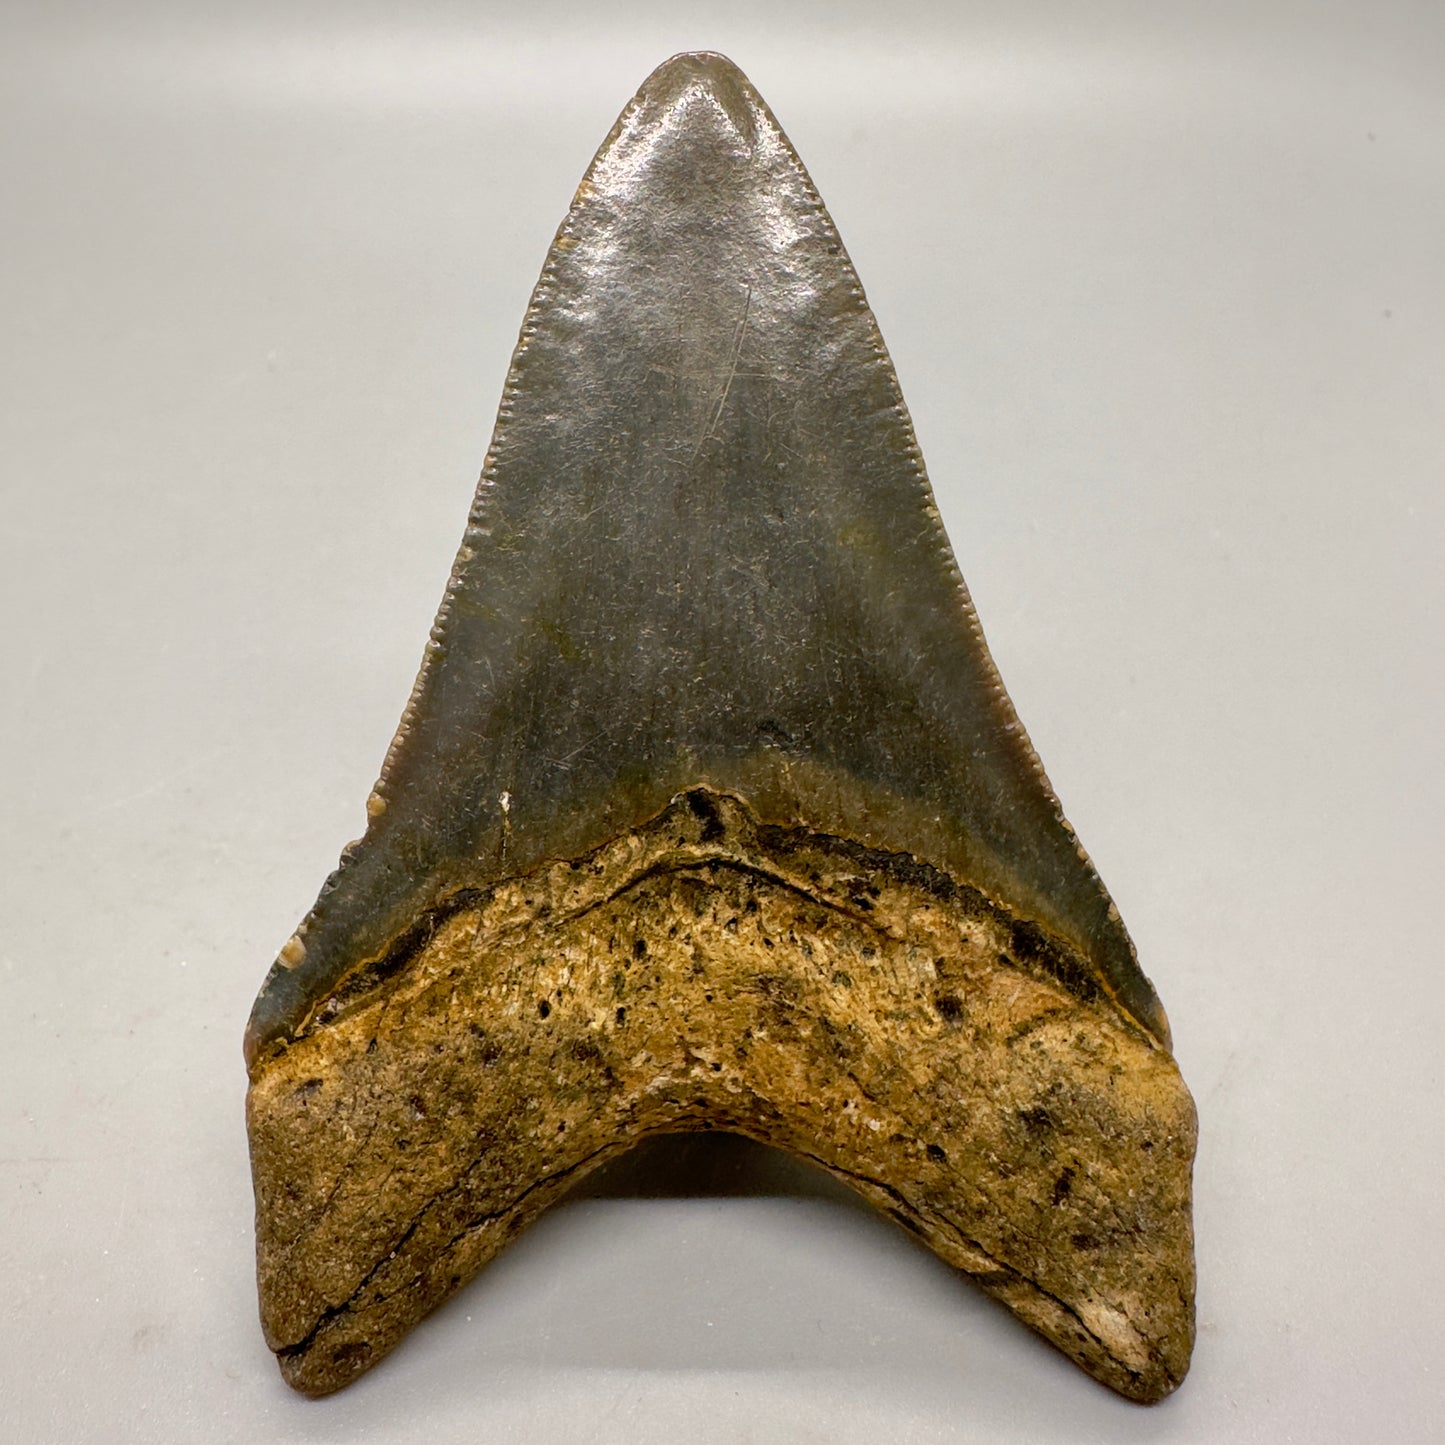 Green, Lower 3.44" Fossil Megalodon Tooth - North Carolina CM4588 - Back